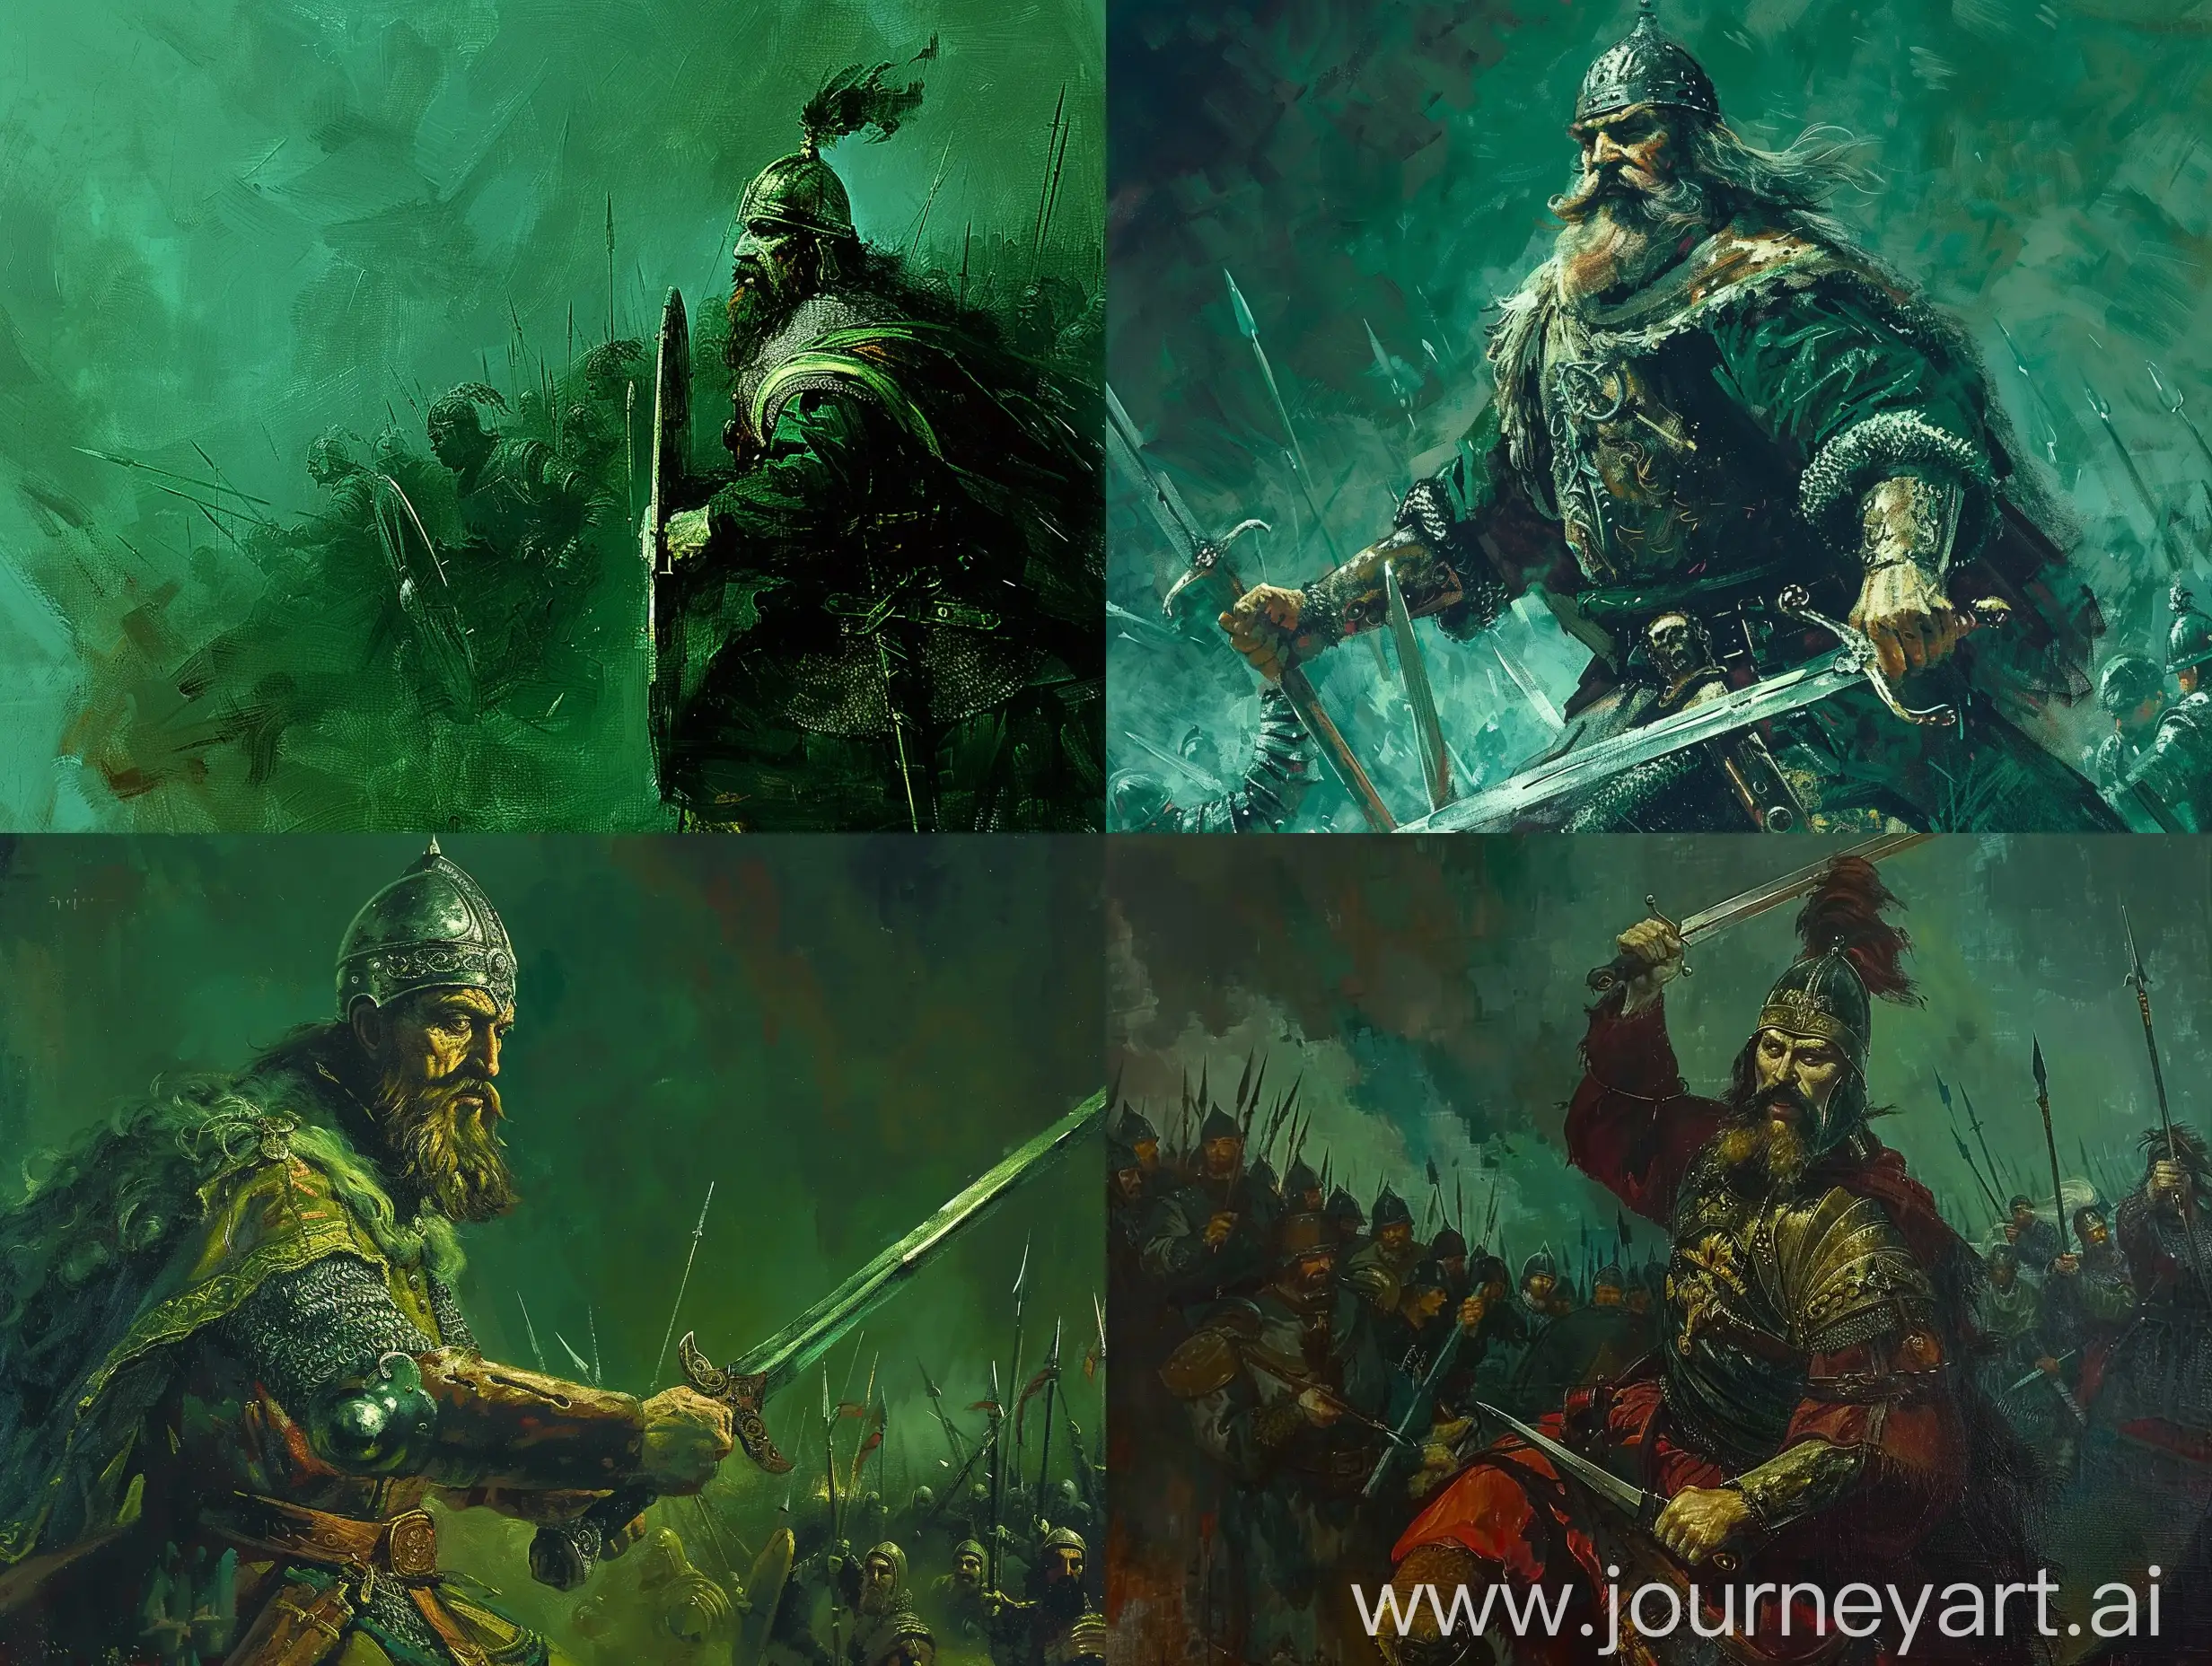 Sviotoslav-the-Brave-in-Battle-Painting-with-Dark-Green-Background